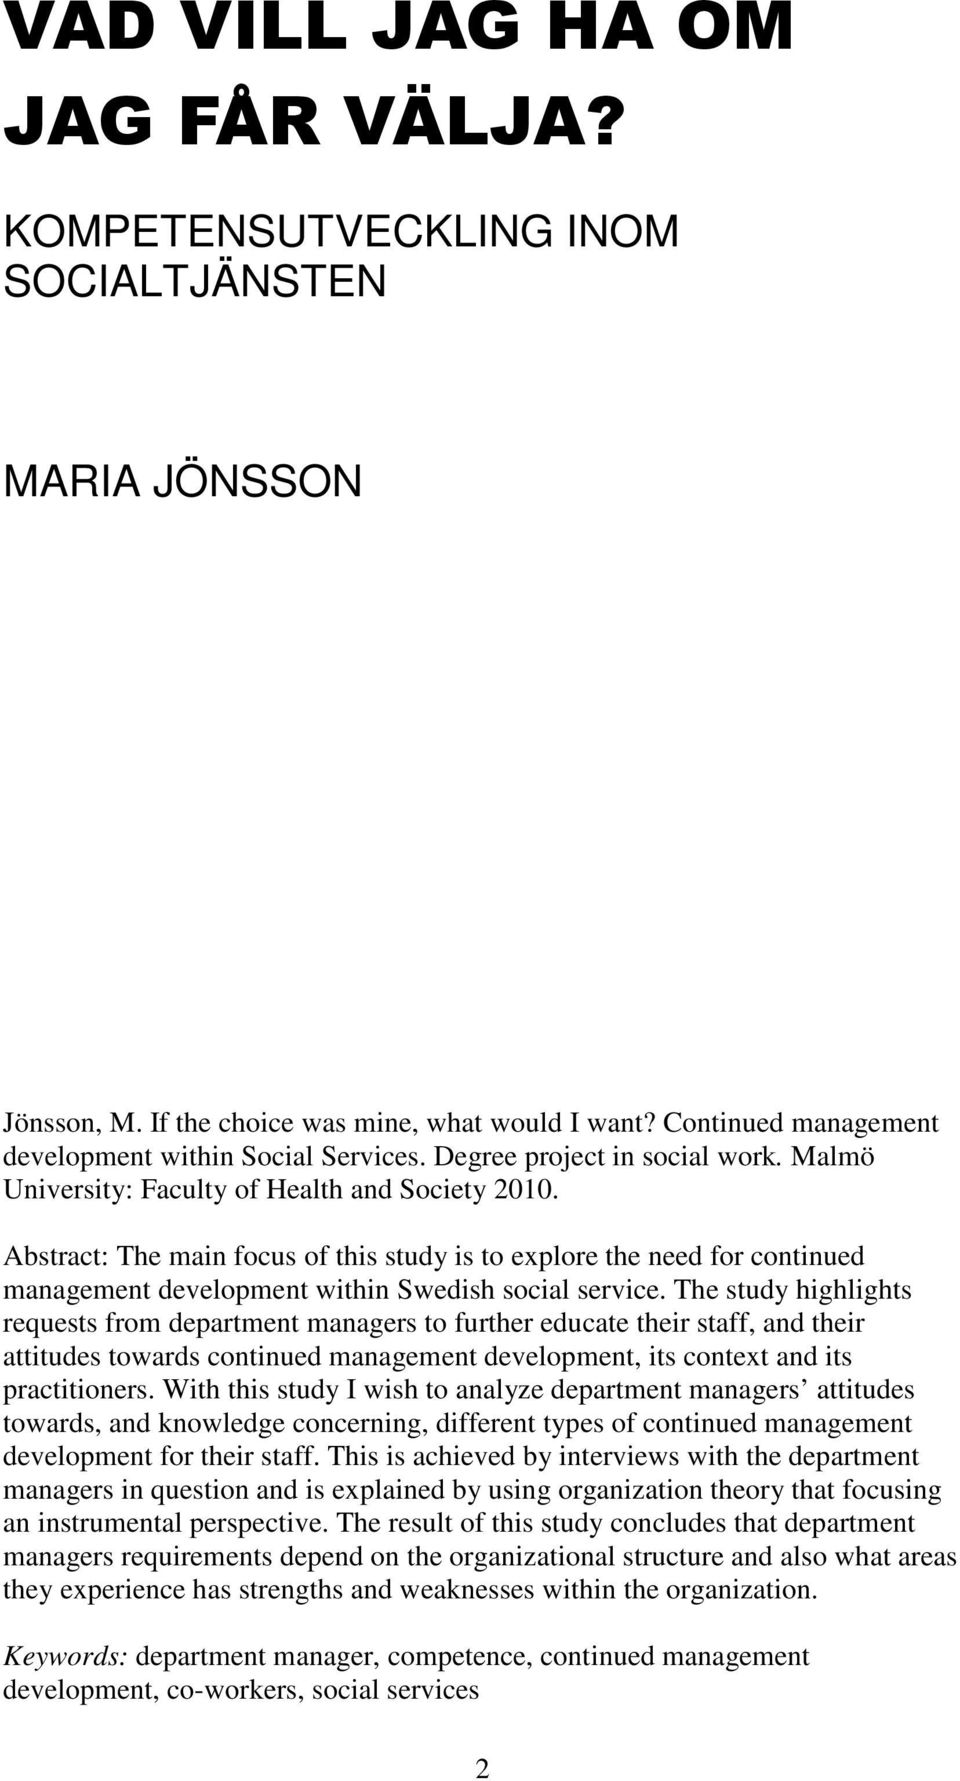 Abstract: The main focus of this study is to explore the need for continued management development within Swedish social service.